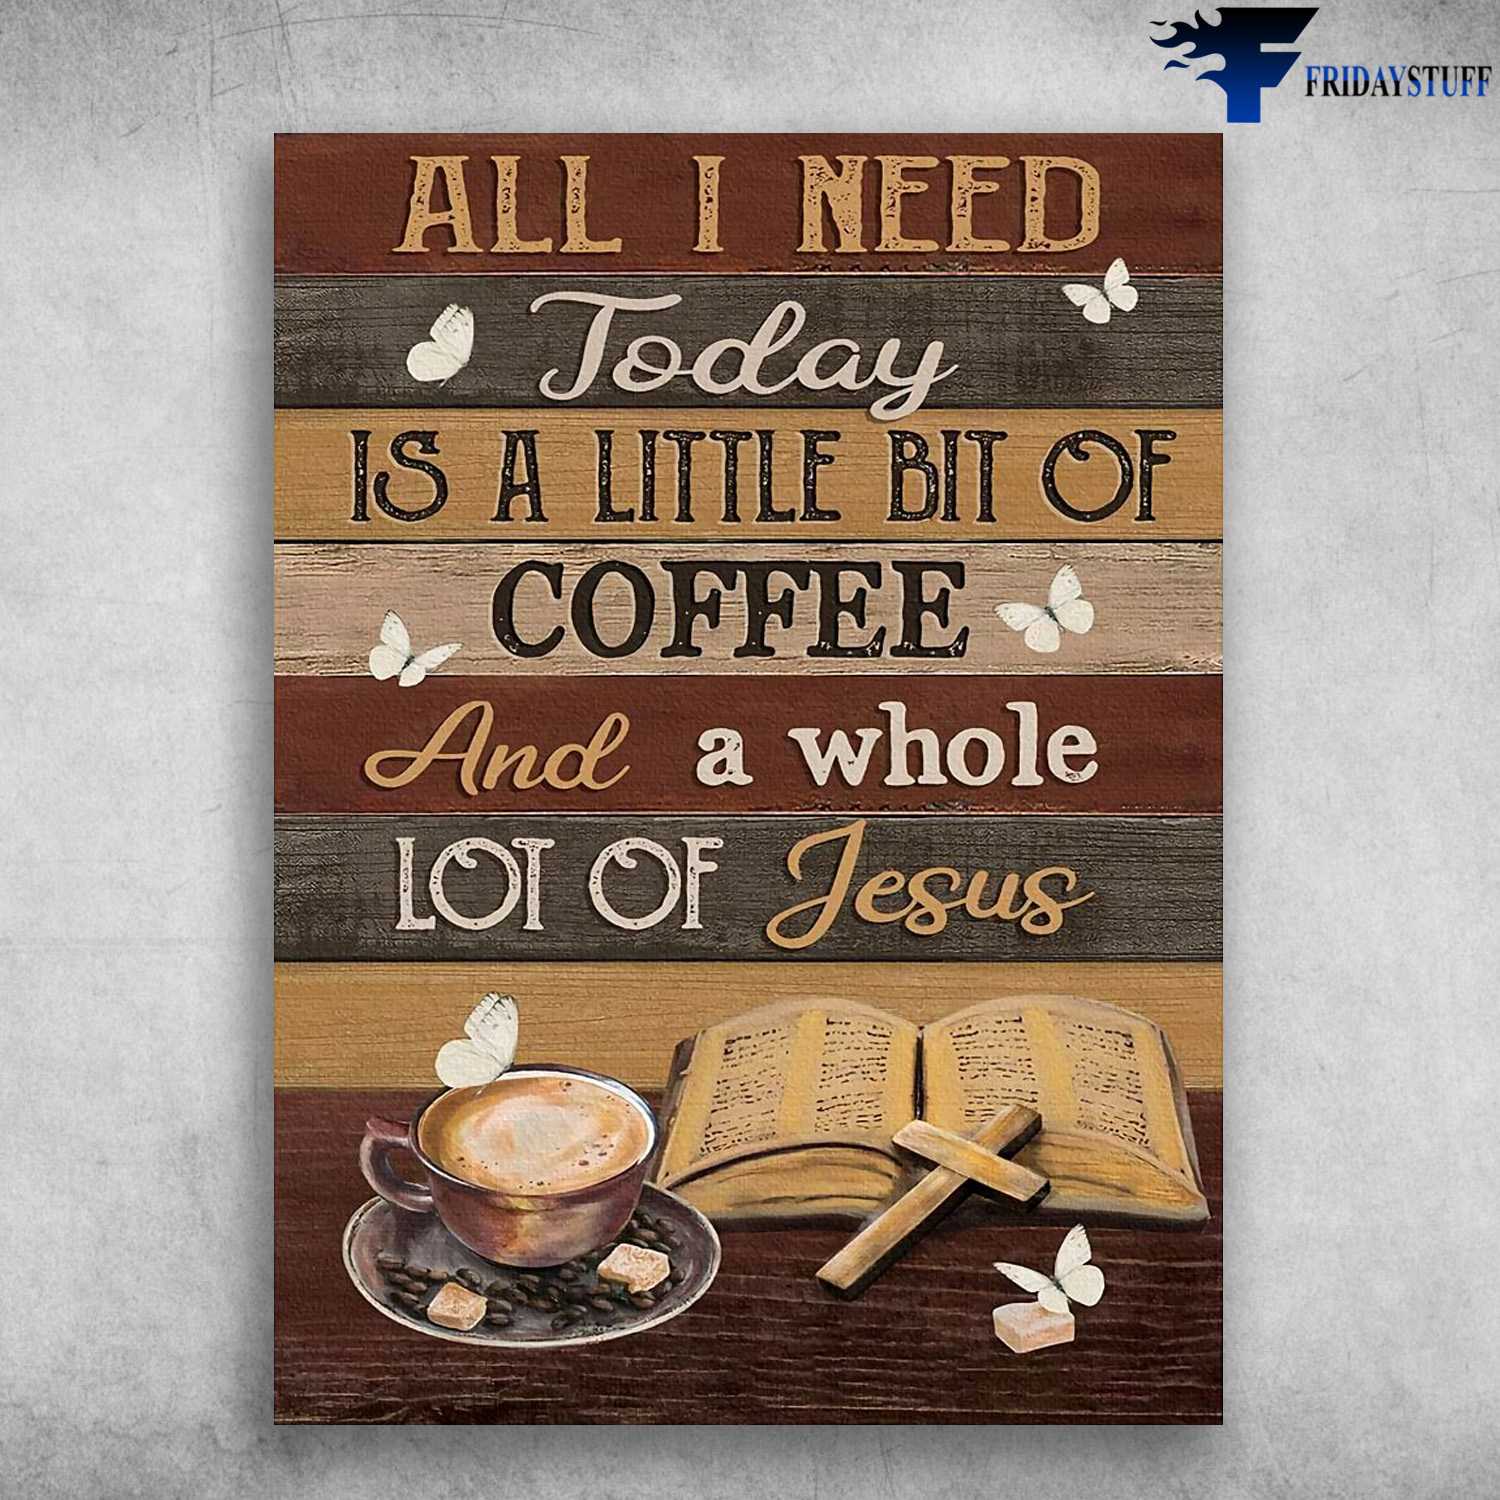 Coffee And Bible, All I Need Today, Is A Little Bit Of Coffee, And A Whole Lot Of Jesus